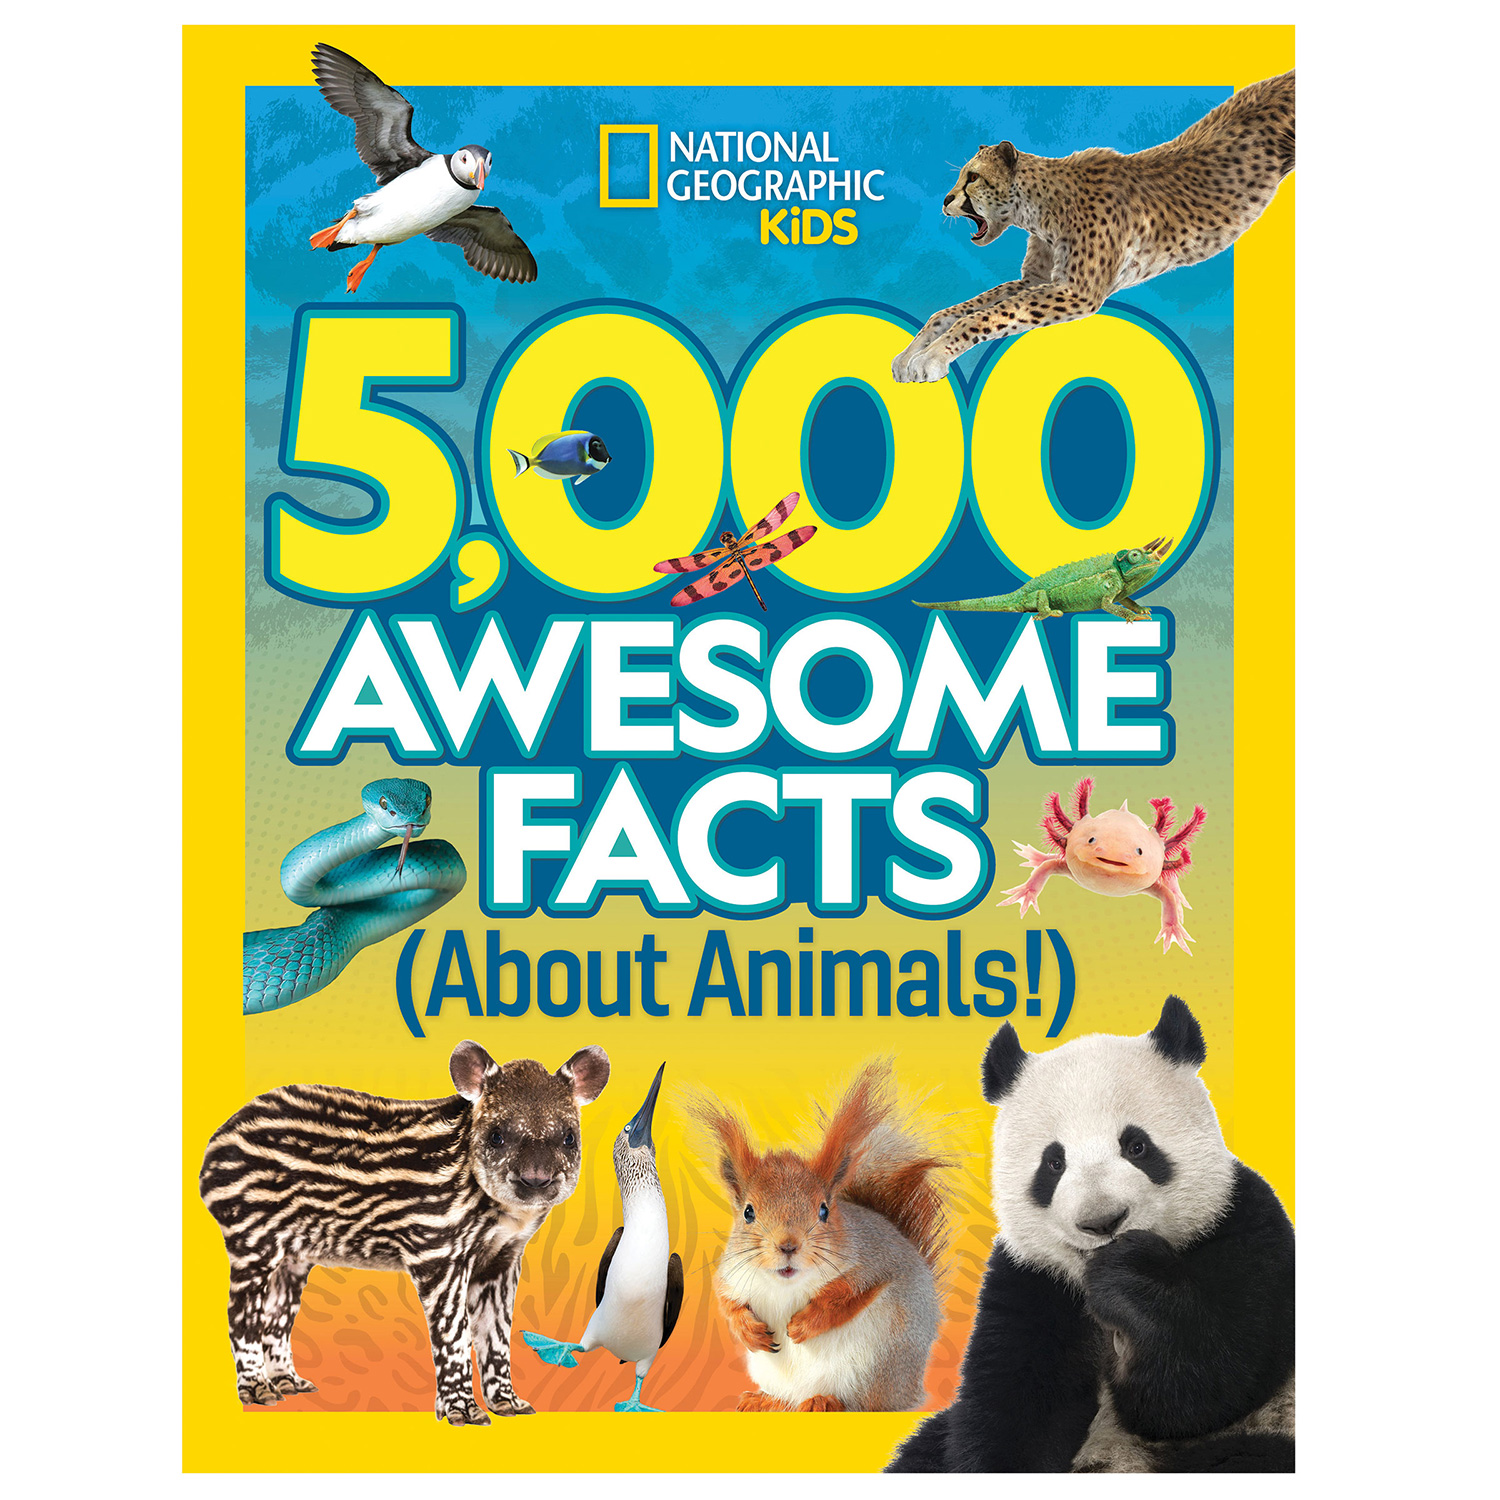 National Geographic: 5000 Awesome Facts about Animals Book (Hardcover) | 2  Reviews | 5 Stars | Signals | HBJ942